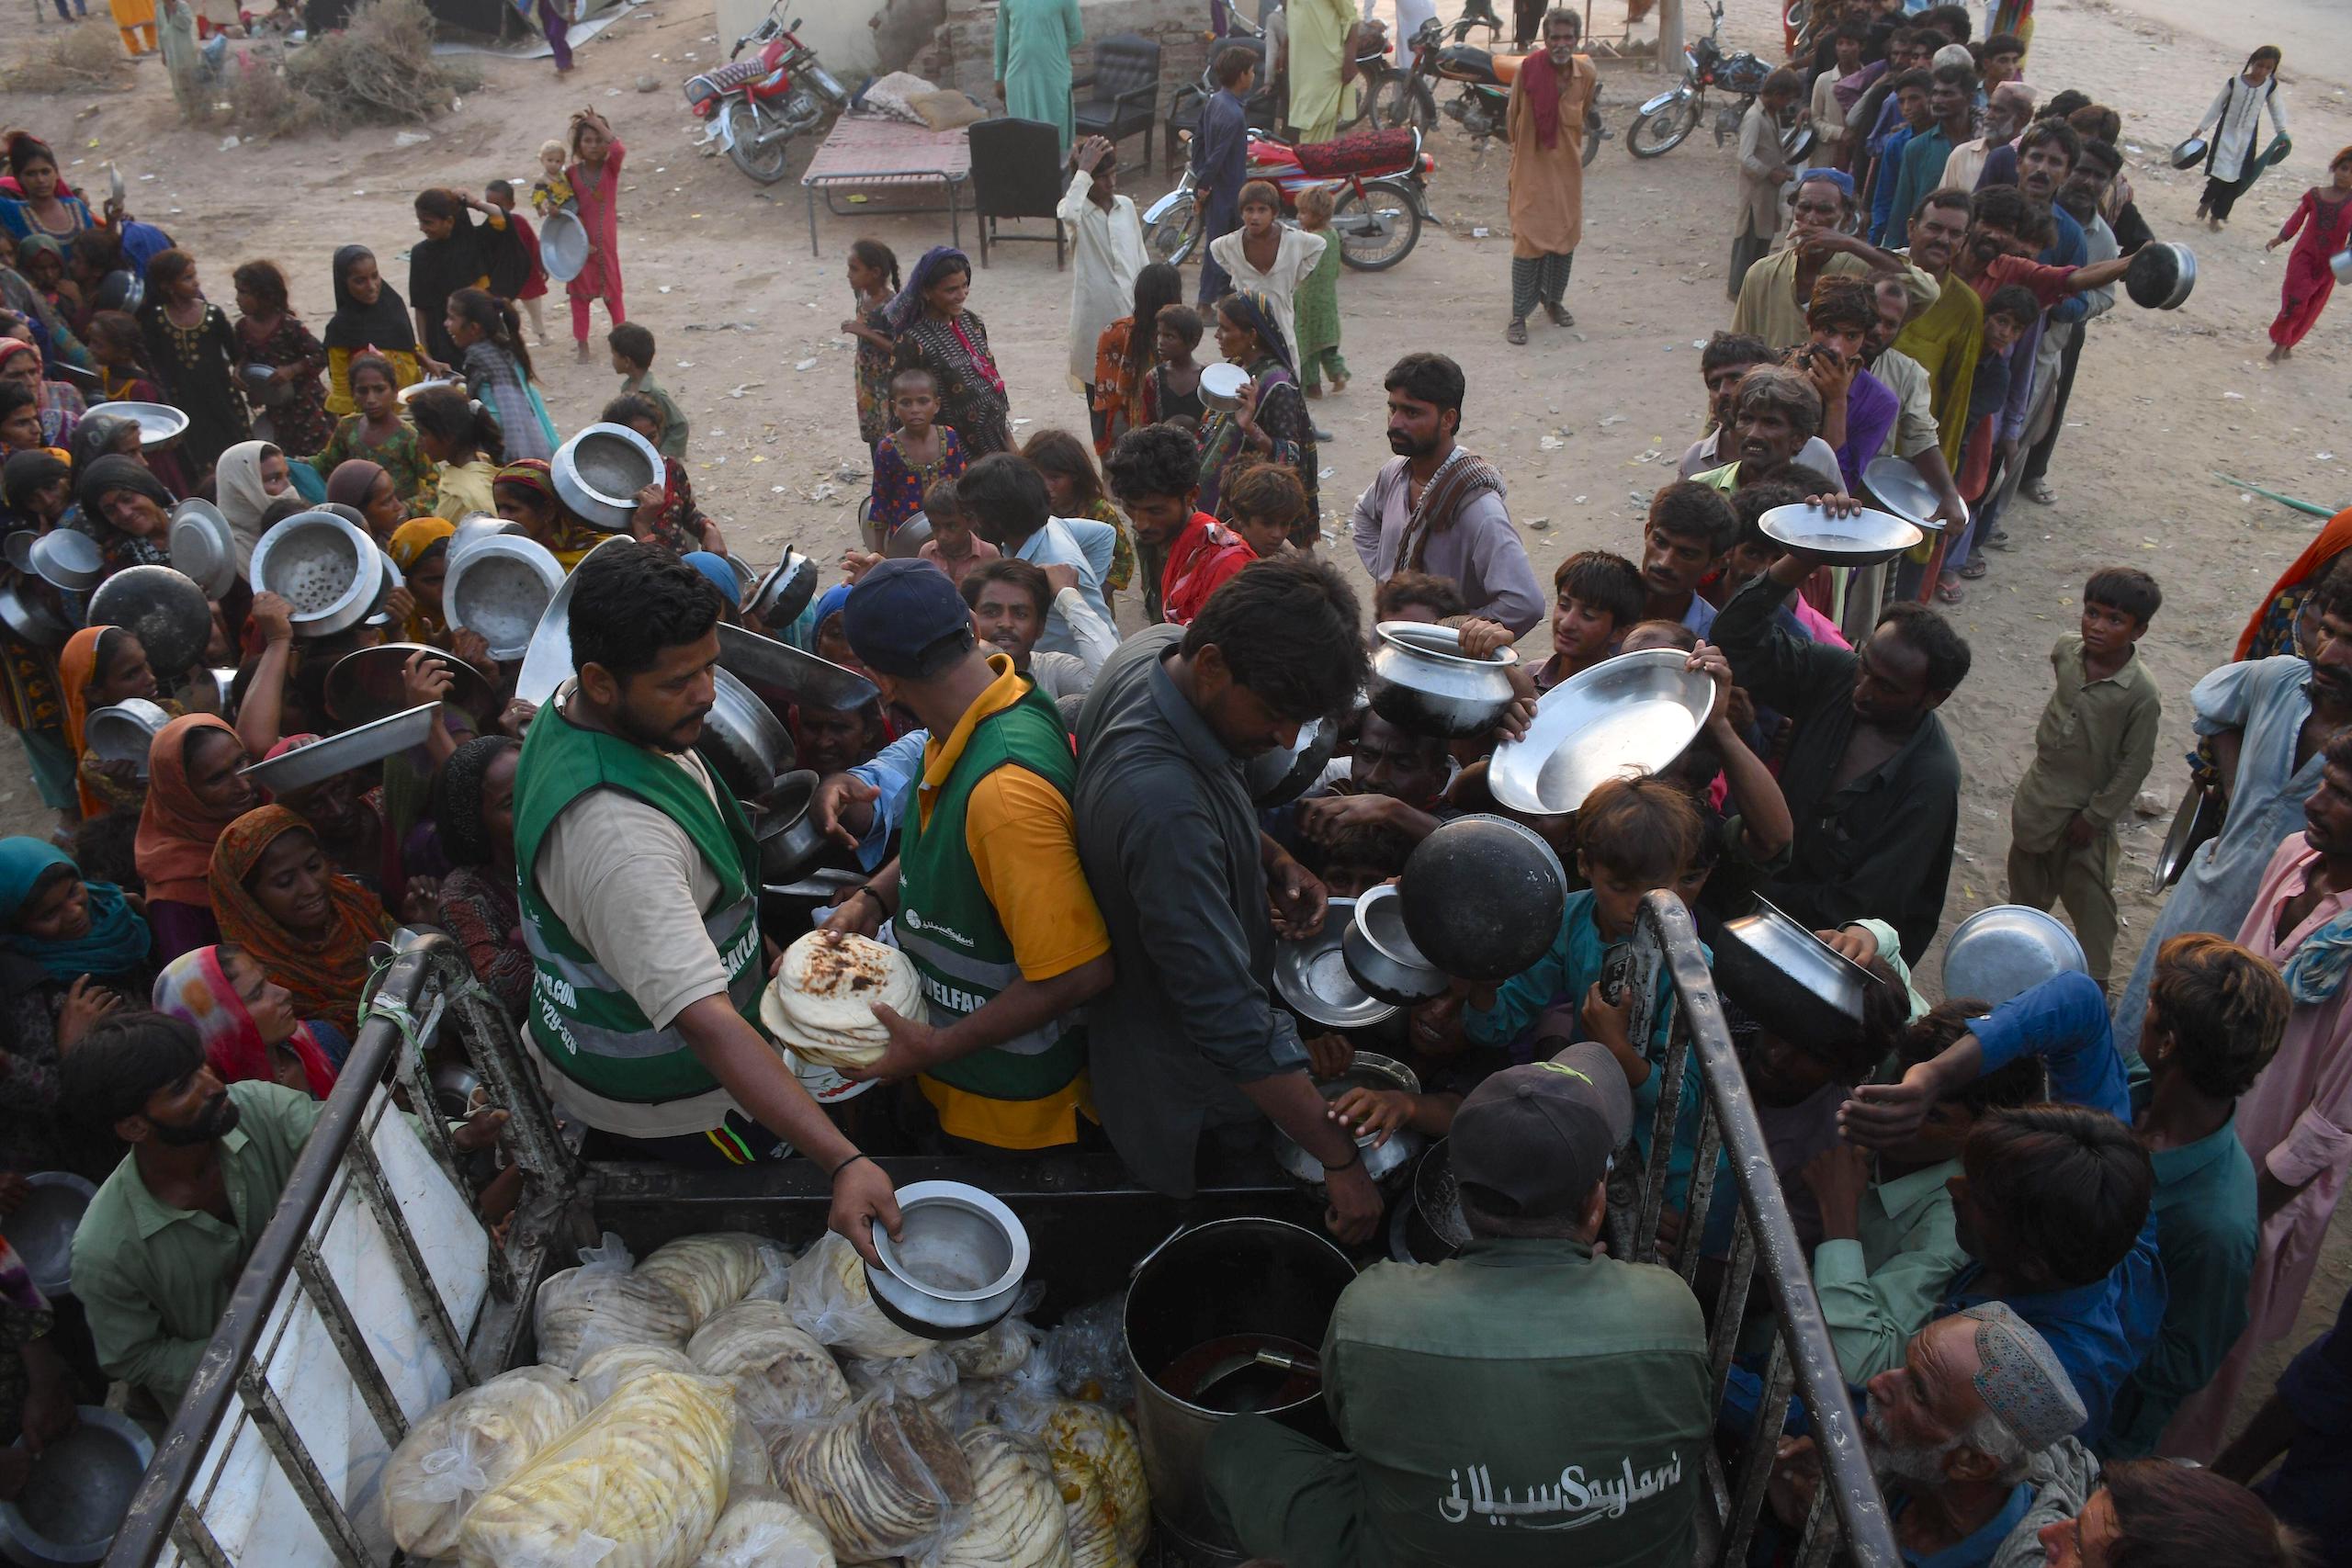 People affected by floods receive free food in flooded areas in Pakistan